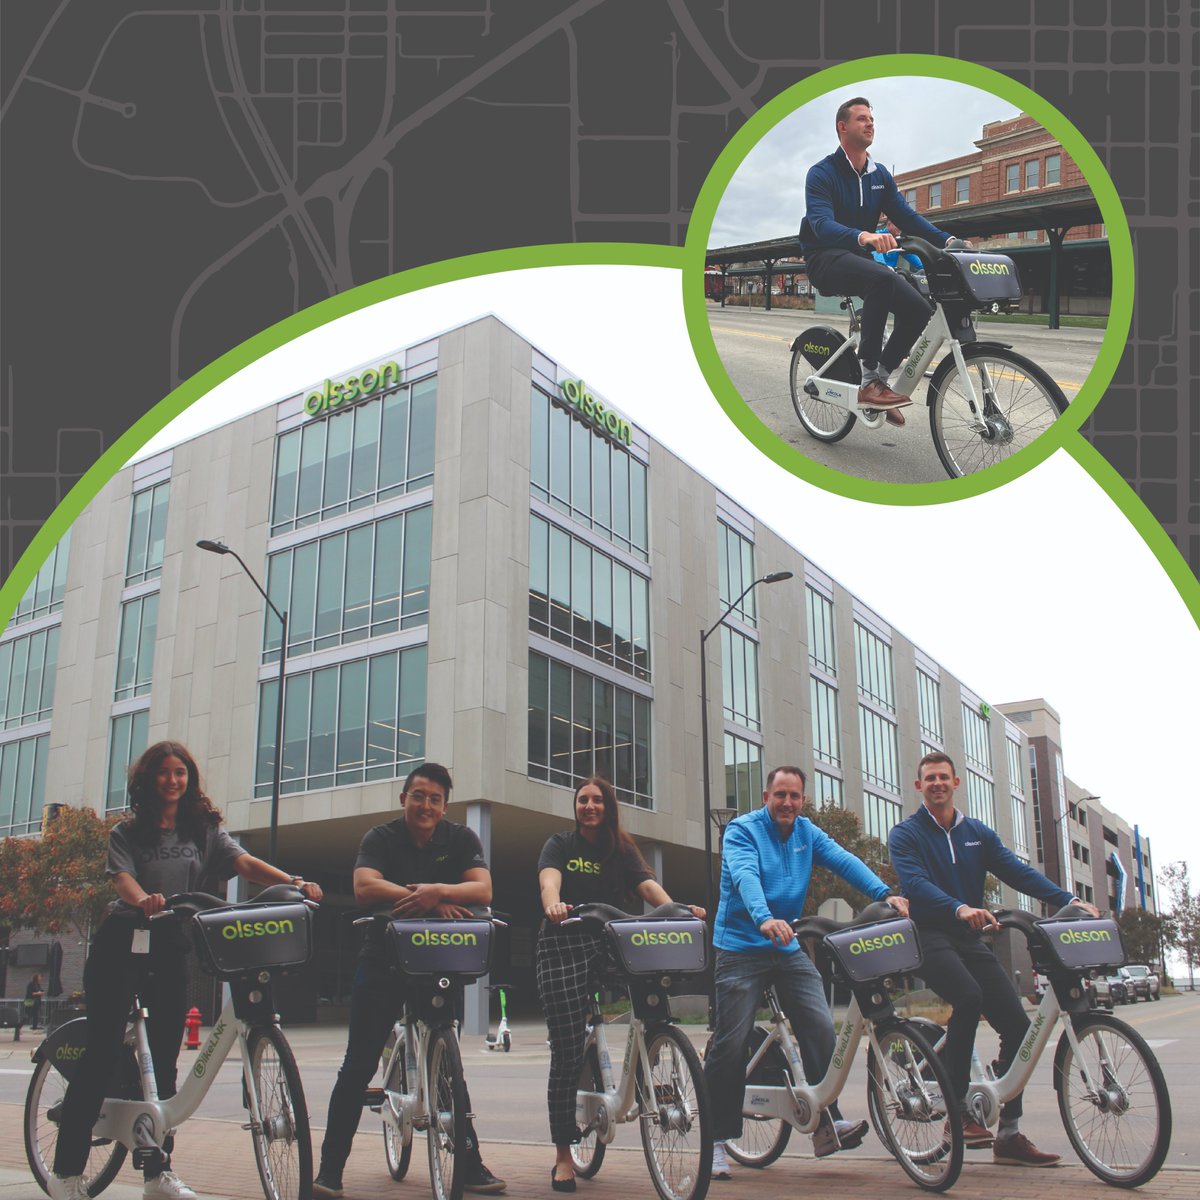 We're taking another opportunity to say THANK YOU to one of our extraordinary @BikeLNK partners - @WeAreOlsson! Olsson's ongoing support of bike share reflects their awesome commitment to the Capital City and bike mobility in Lincoln. 💚 (1/3)